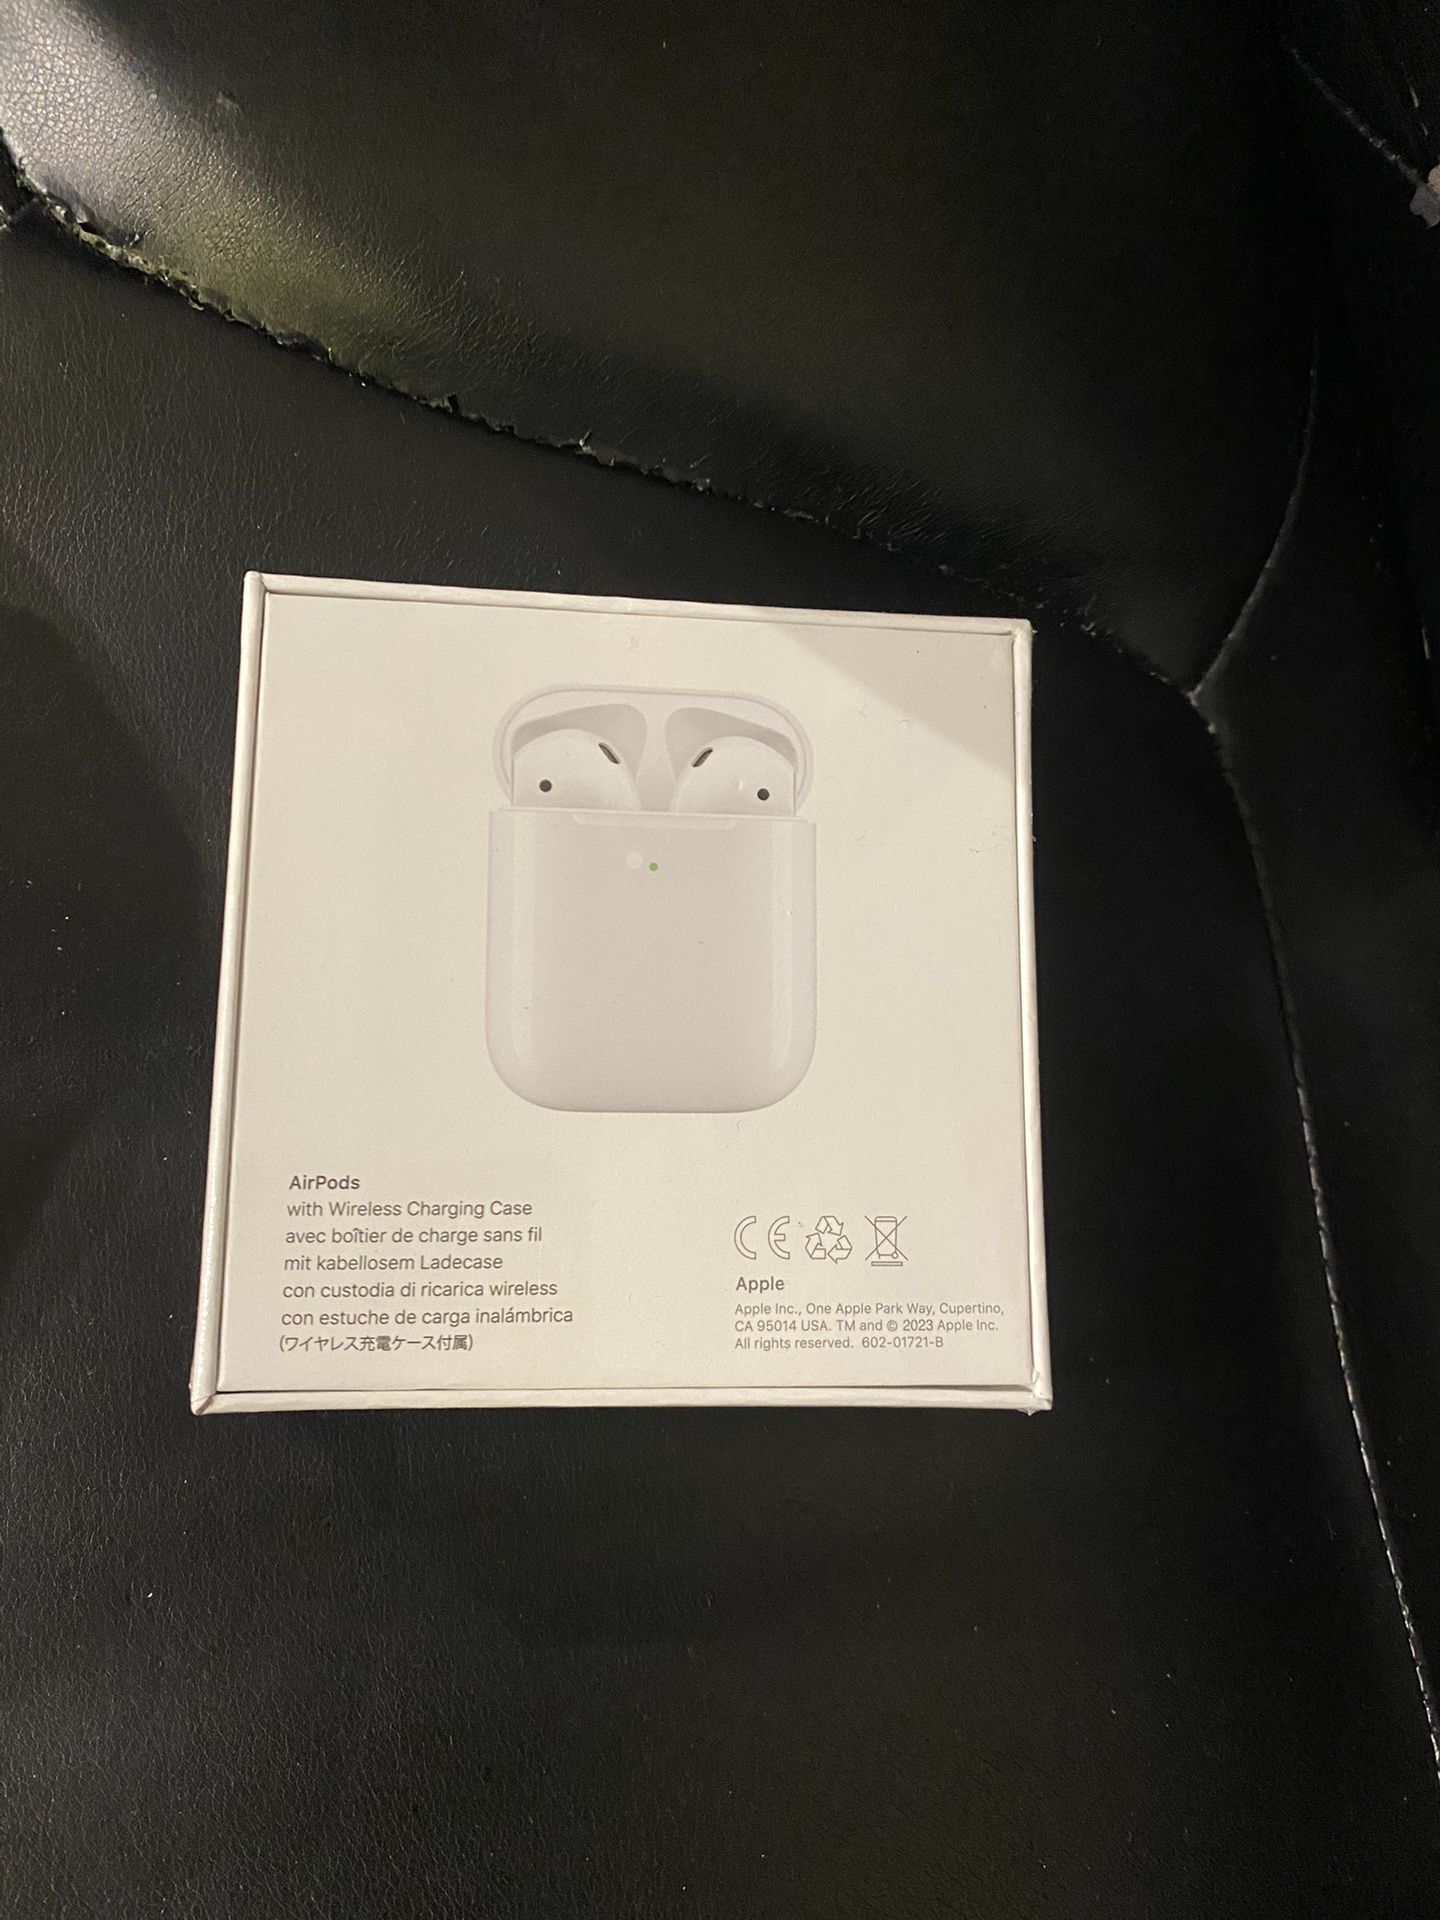 Apple AirPods (2nd Generation) Wireless Earbuds with Lightning Charging Case Included. Over 24 Hours of Battery Life, Effortless Setup. Bluetooth Head